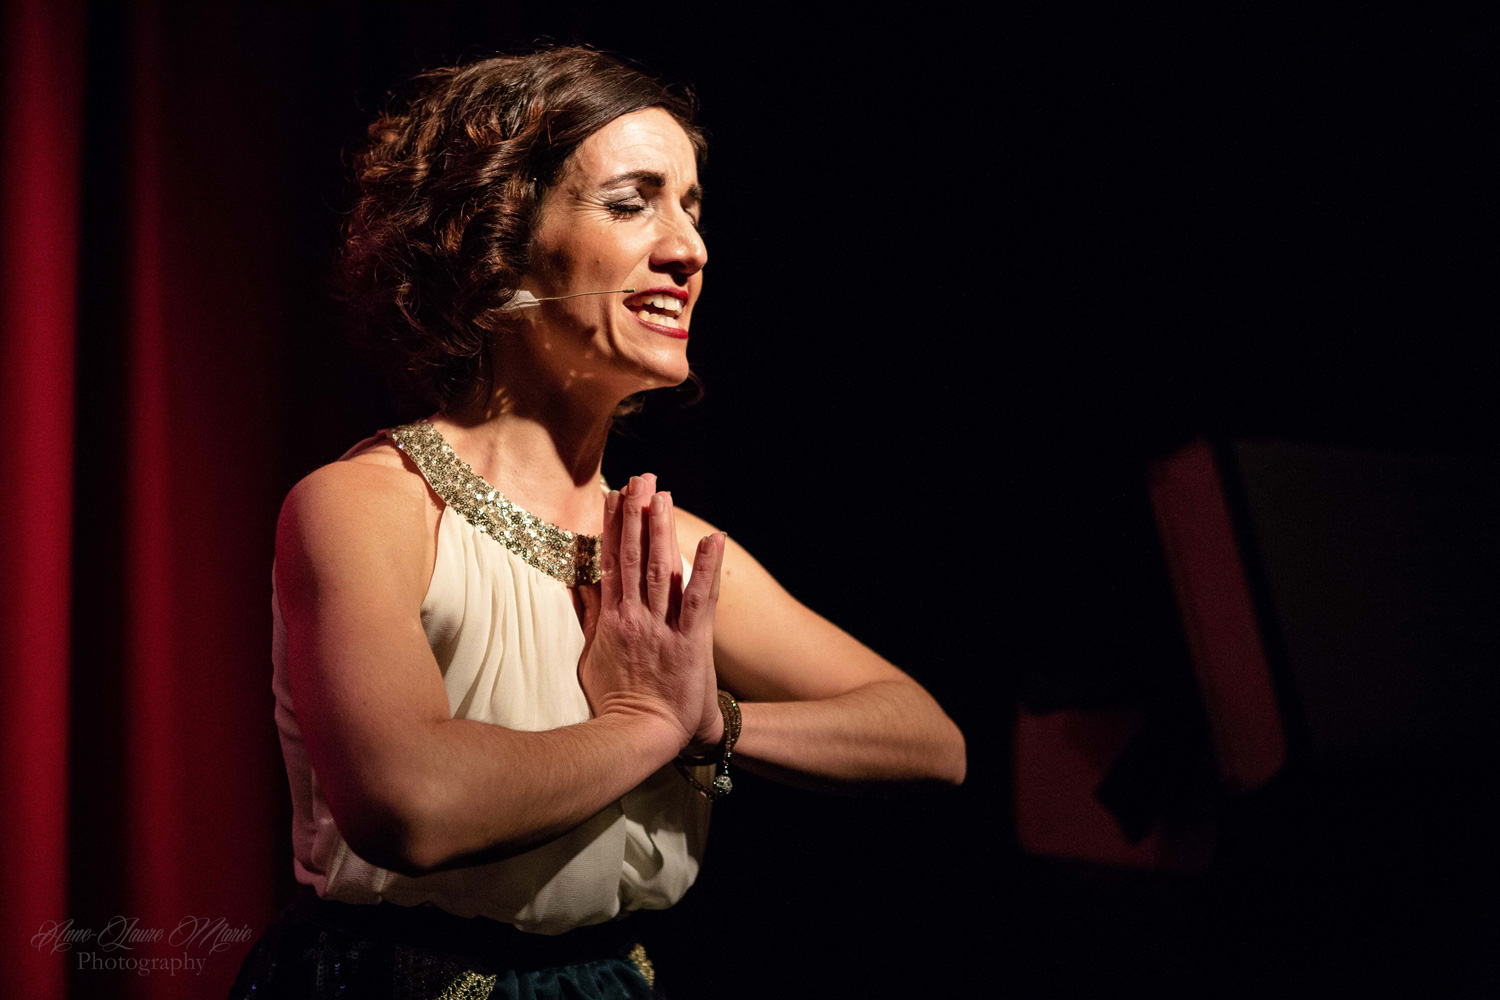  Glam Adelaide   "There are knives in  her voice"  ★★★★★  